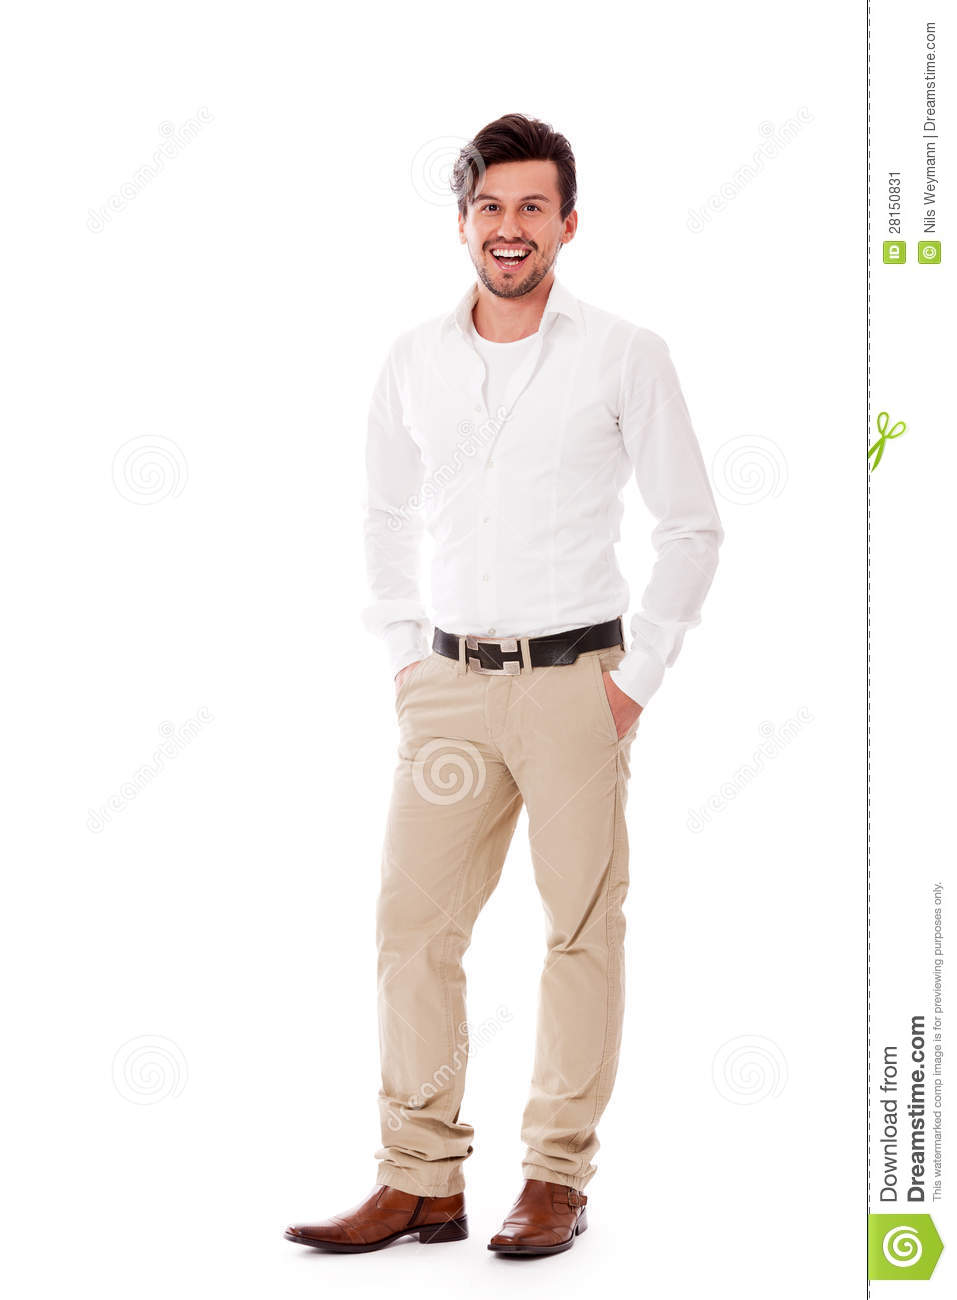 Young Business Man In Casual Outfit Smiling Stock Image   Image    